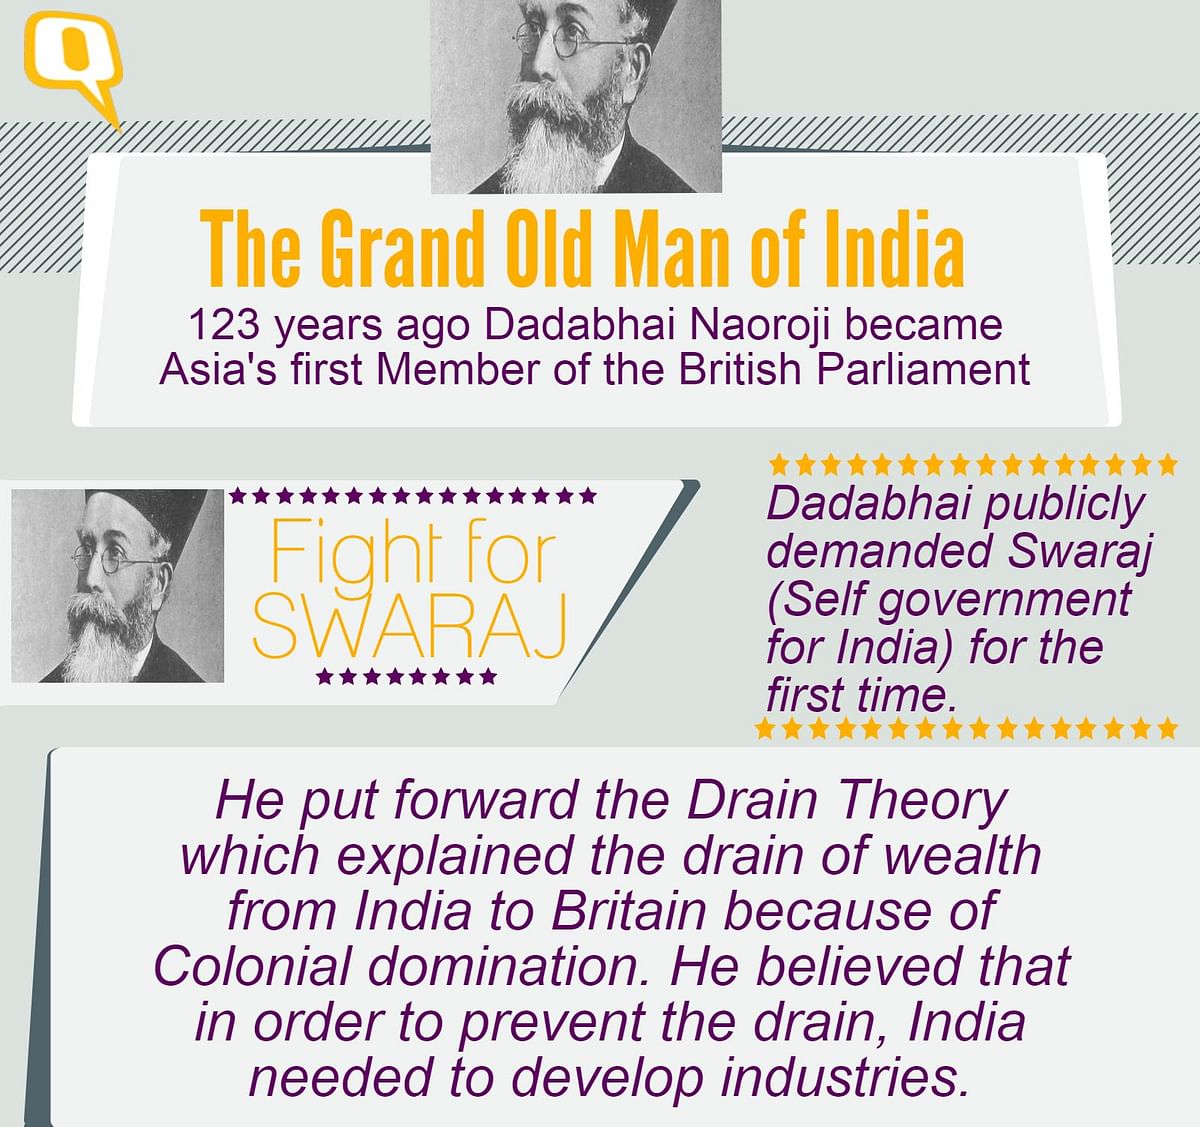 Dadabhai Naoroji was the first Asian to get elected as a British Parliament MP on 6 July 1892.